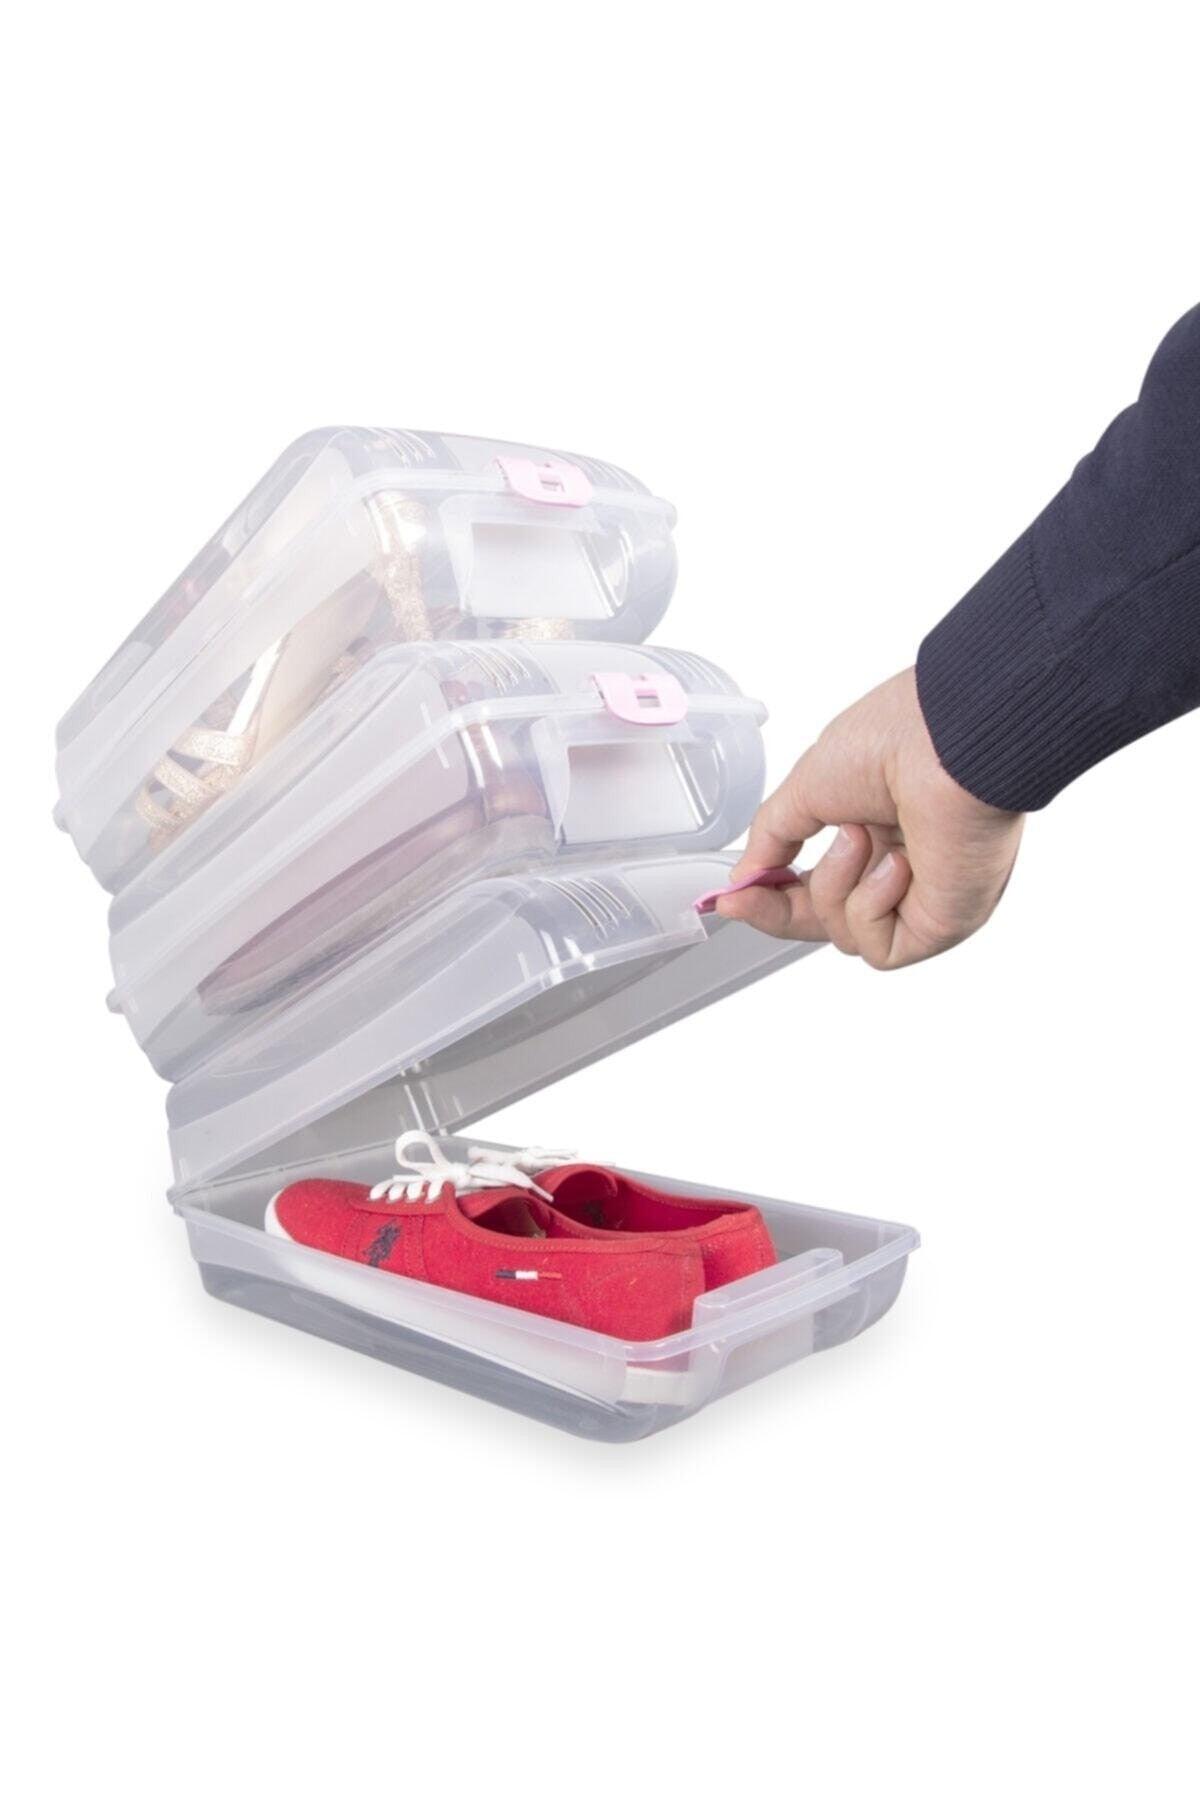 Women's Shoe Storage And Protection Box (1 Piece) - Swordslife